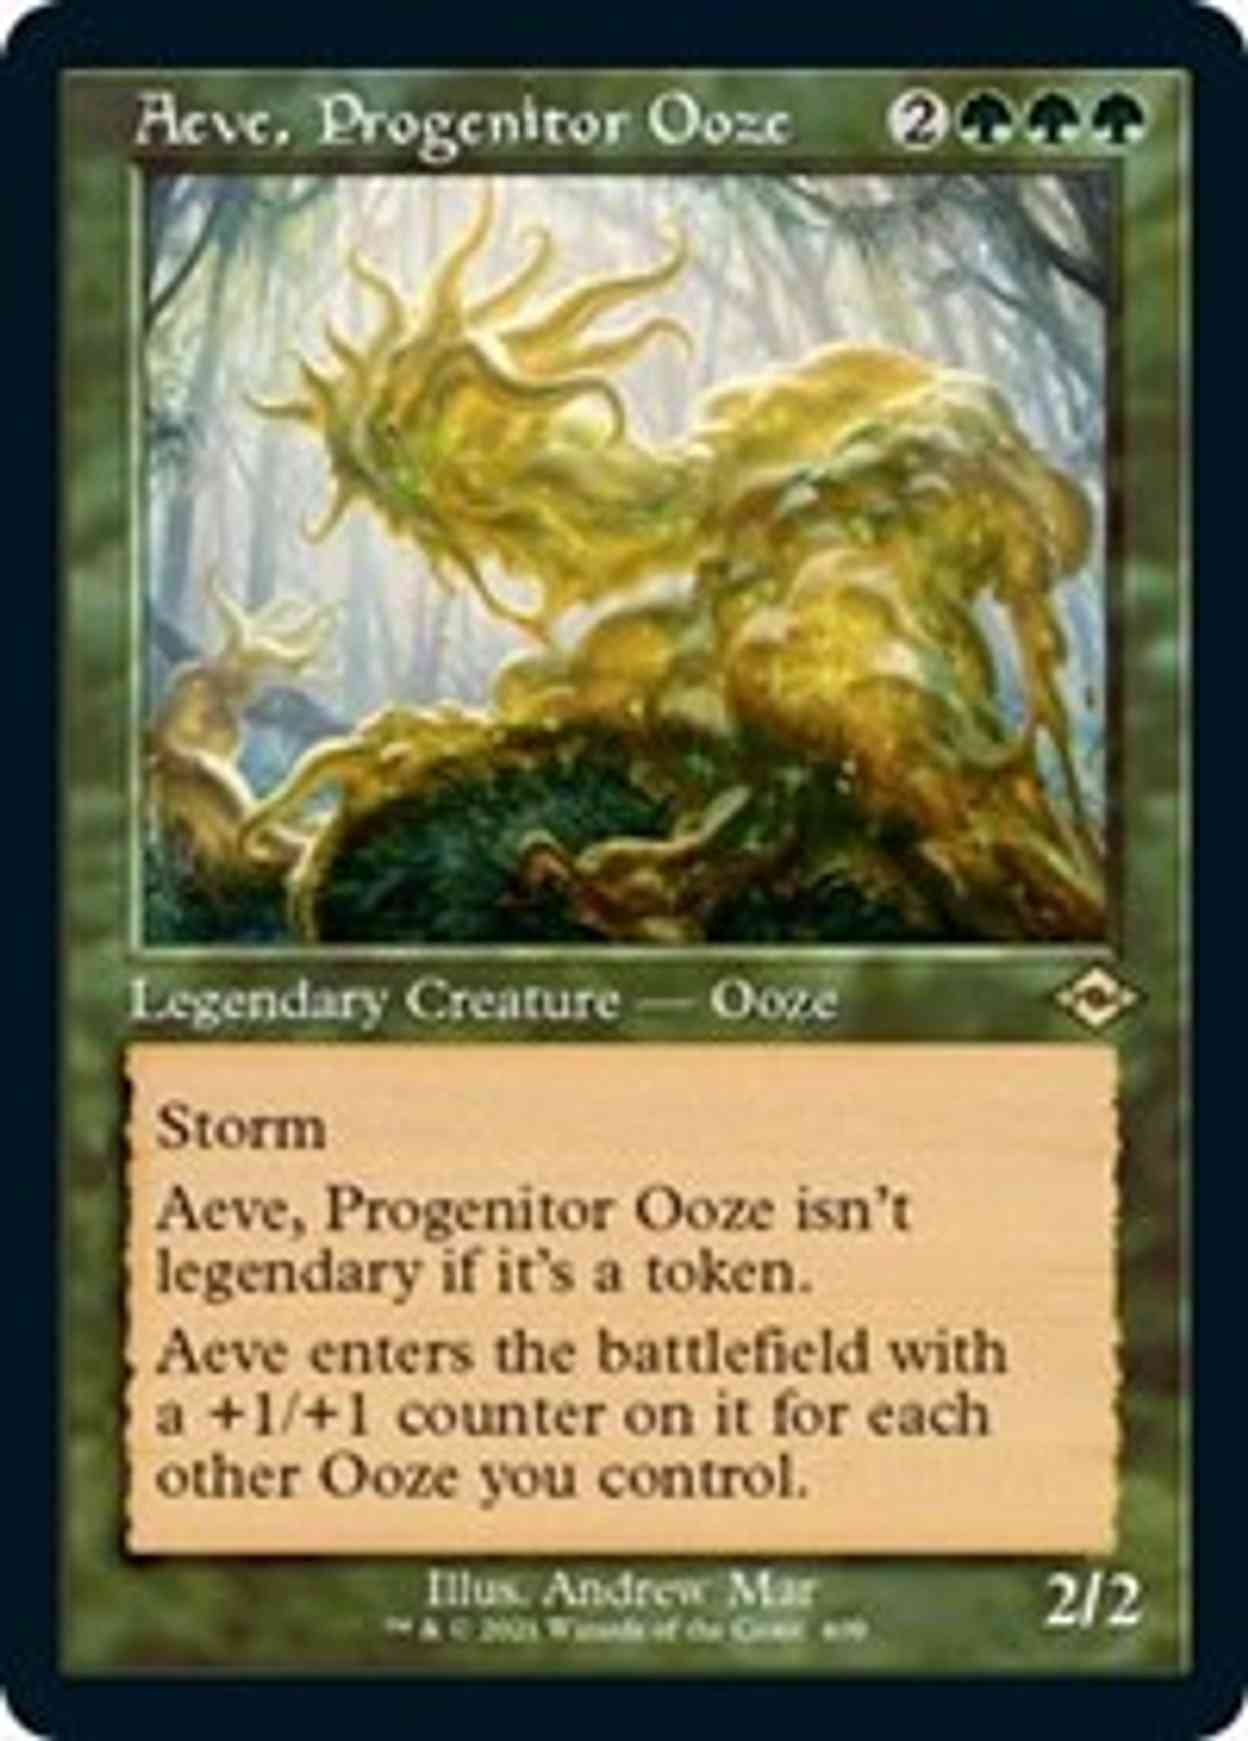 Aeve, Progenitor Ooze (Retro Frame) (Foil Etched) magic card front